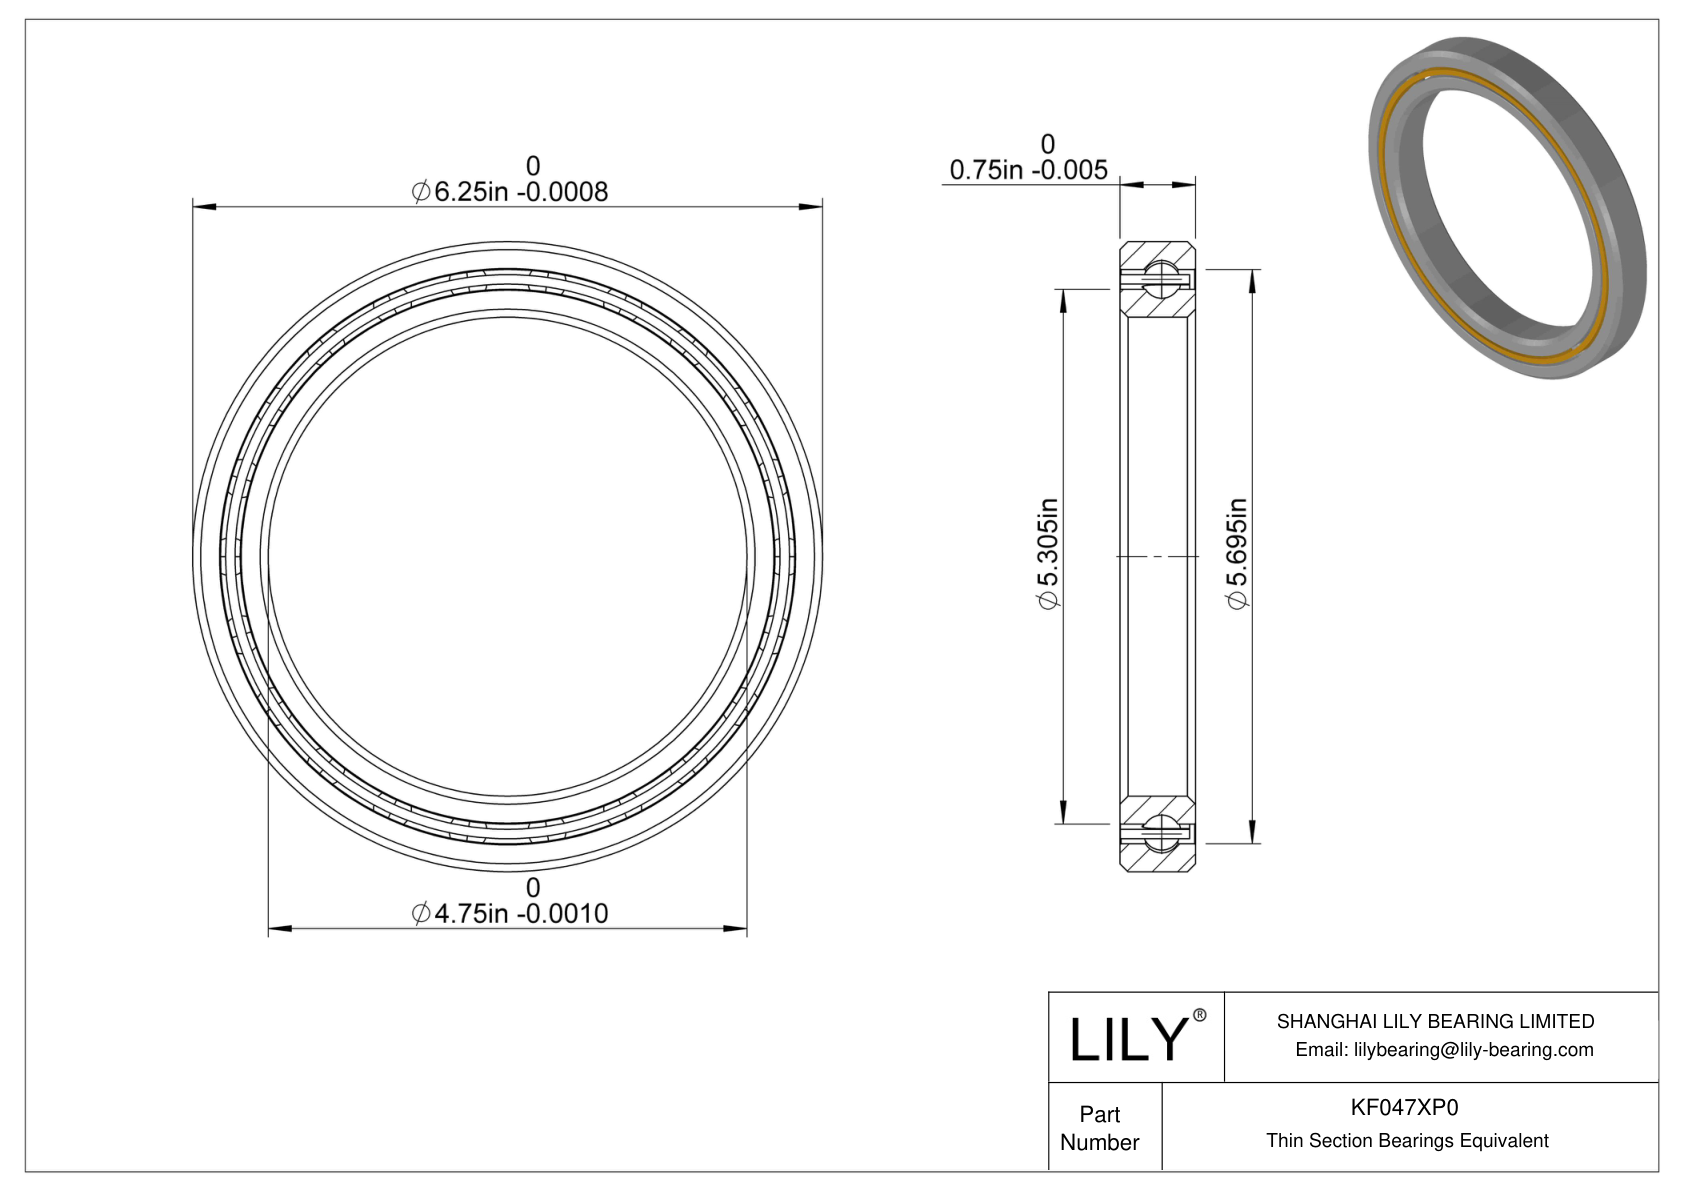 KF047XP0 Constant Section (CS) Bearings cad drawing